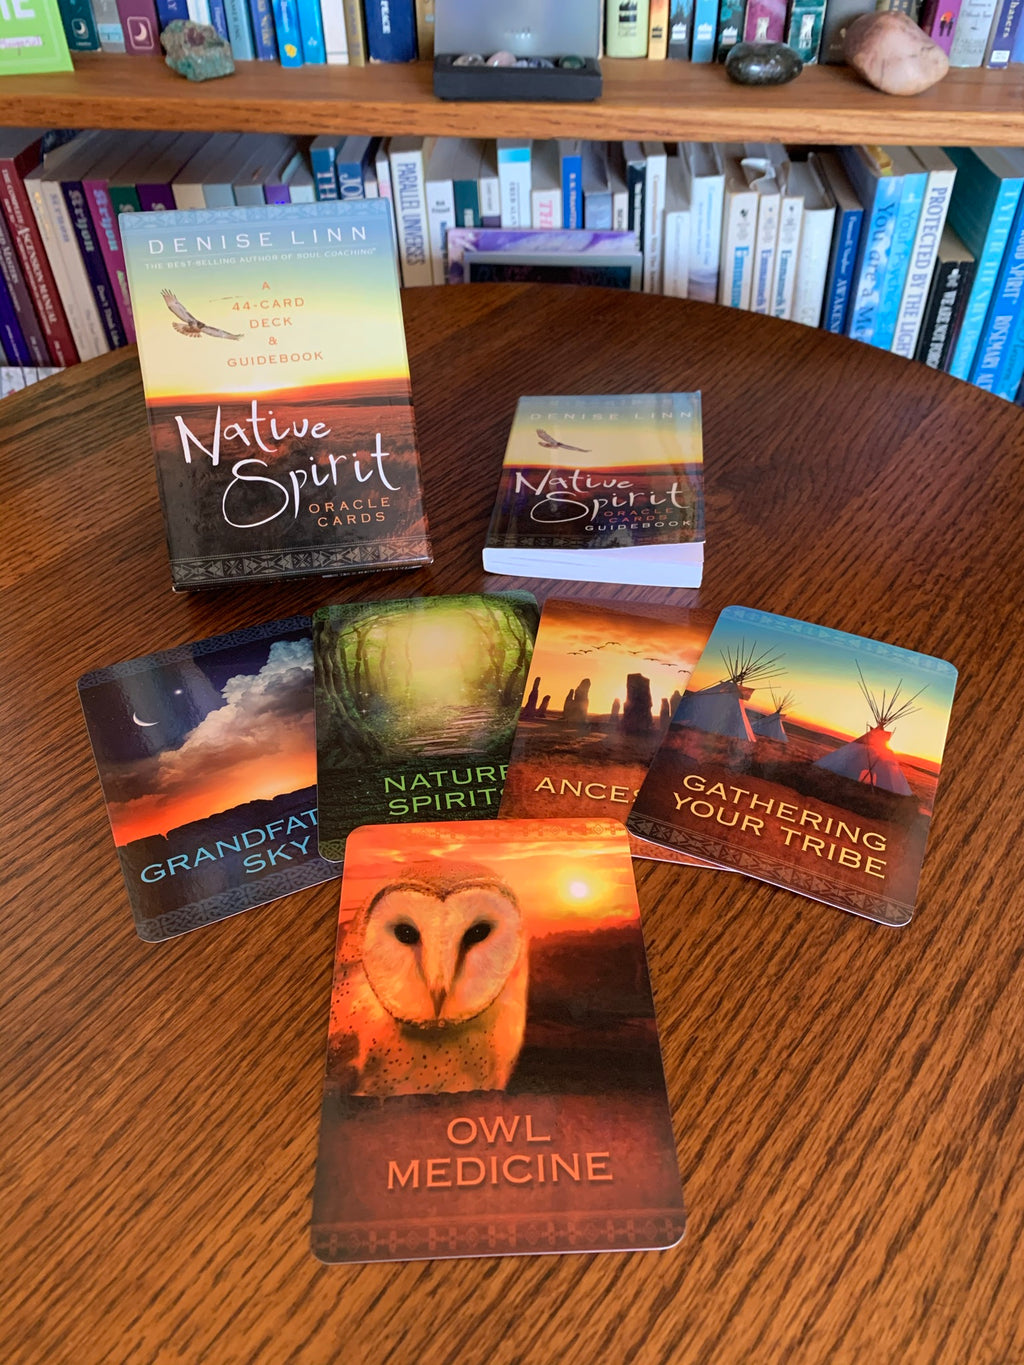 Photo of the Native Spirit Oracle Cards (shows 5 cards, the box front and book). Includes 44 cards, a guidebook and box for storage. This is a personal favorite of mine. The art is beautiful and the card description has 3 parts: "Card Meaning," "Your Native Spirit Wants You To Know," and "The Journey."  Denise Linn, the author, is a member of the Cherokee Nation, is a best-selling author and she created these cards at the base of a sacred mountain. Price is $18.99.